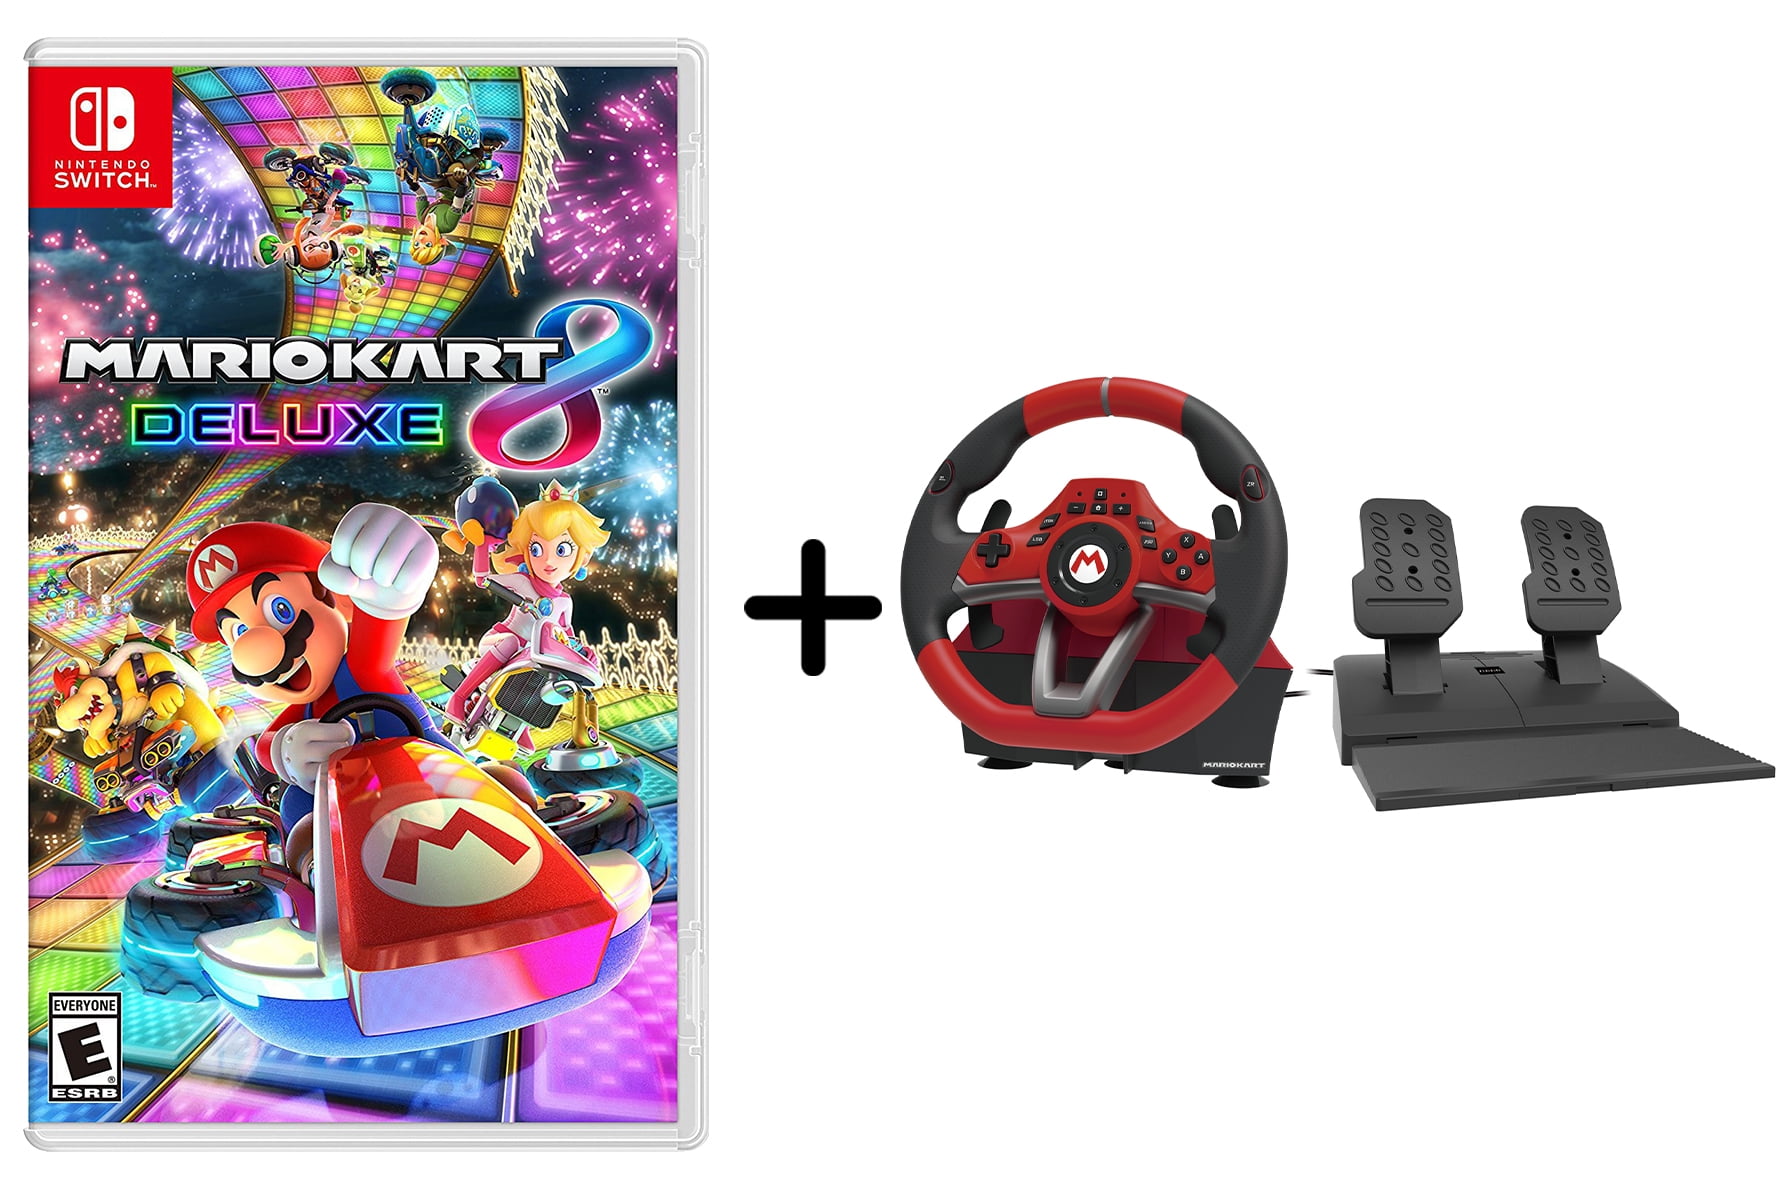 Hori Mario Kart Racing Wheel Pro Deluxe review: 'everything a